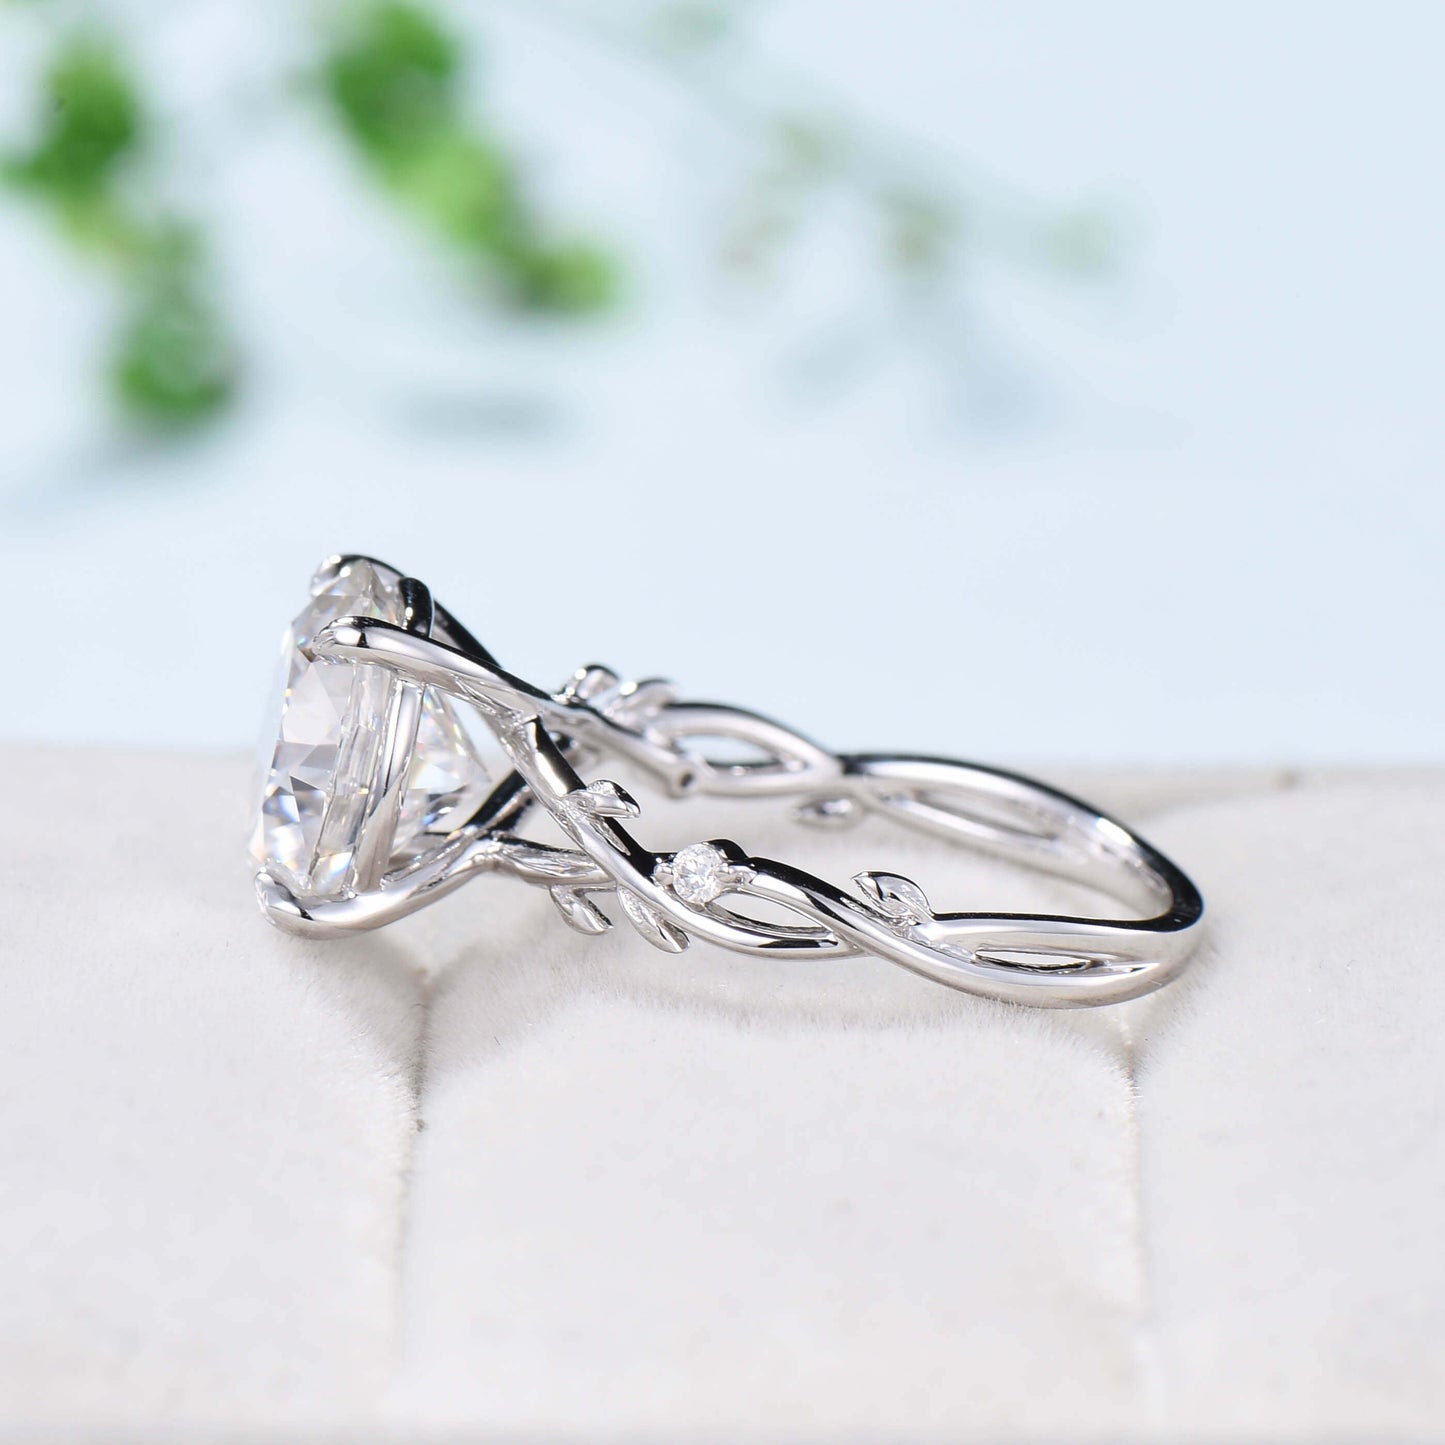 10mm Round Brilliant Moissanite ring Leaf Branch Big 4CT Moissanite Engagement Ring 18K White Gold Nature Inspired Unique Twig Wedding Ring - PENFINE